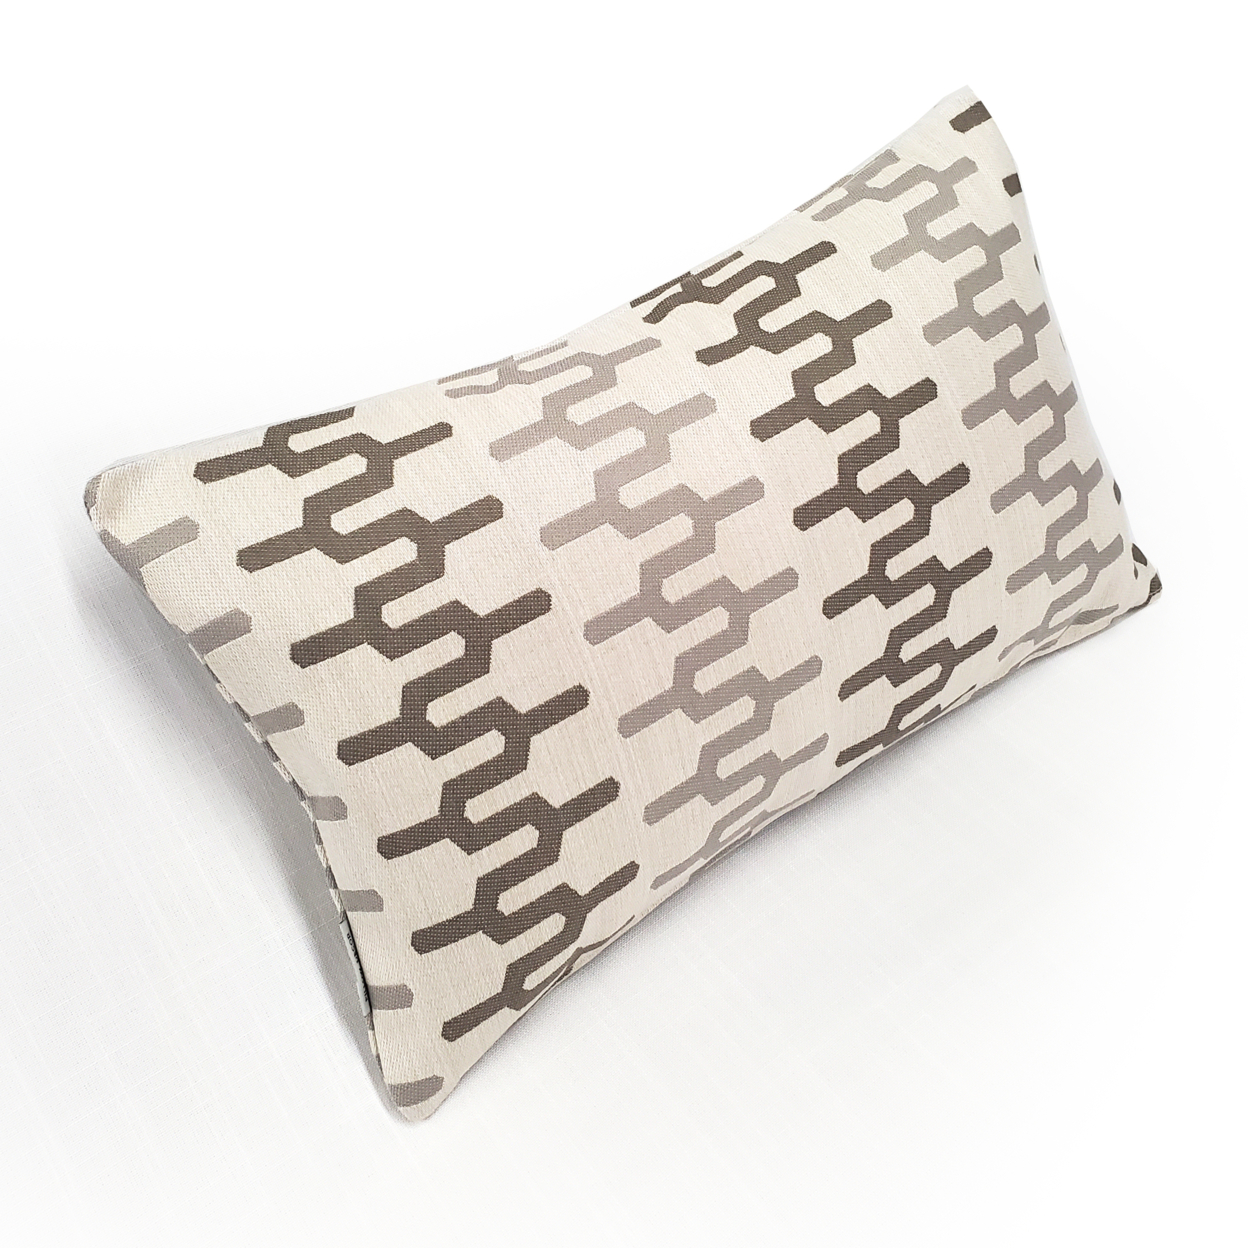 Wake Stone Edge Geometric Outdoor Pillow 12x19, With Polyfill Insert